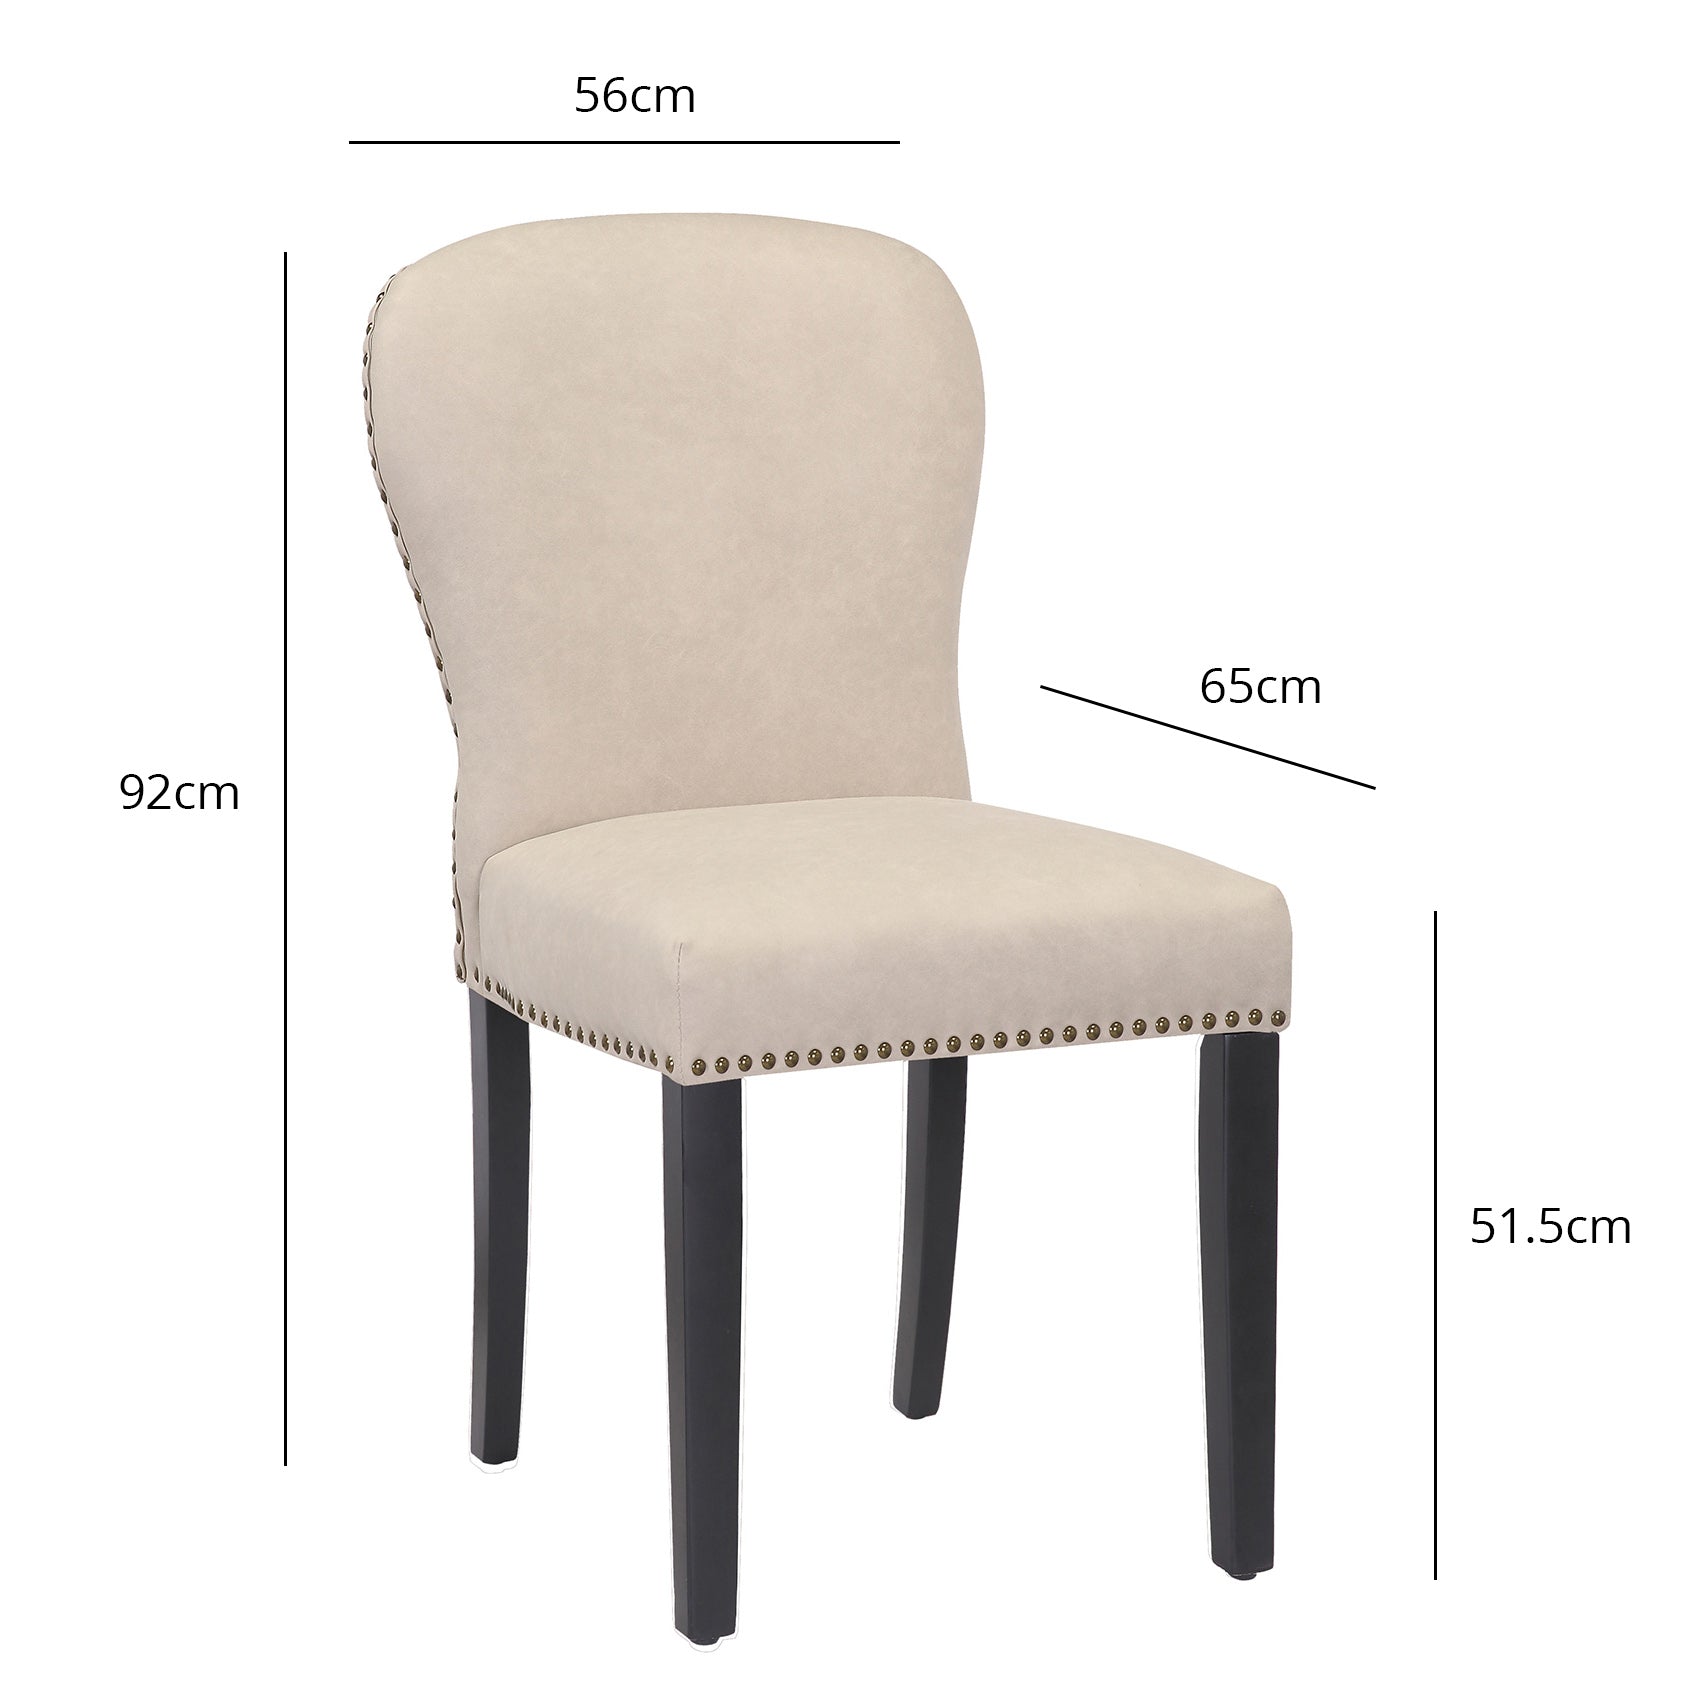 Edward dining chairs - stone and black wood - Laura James